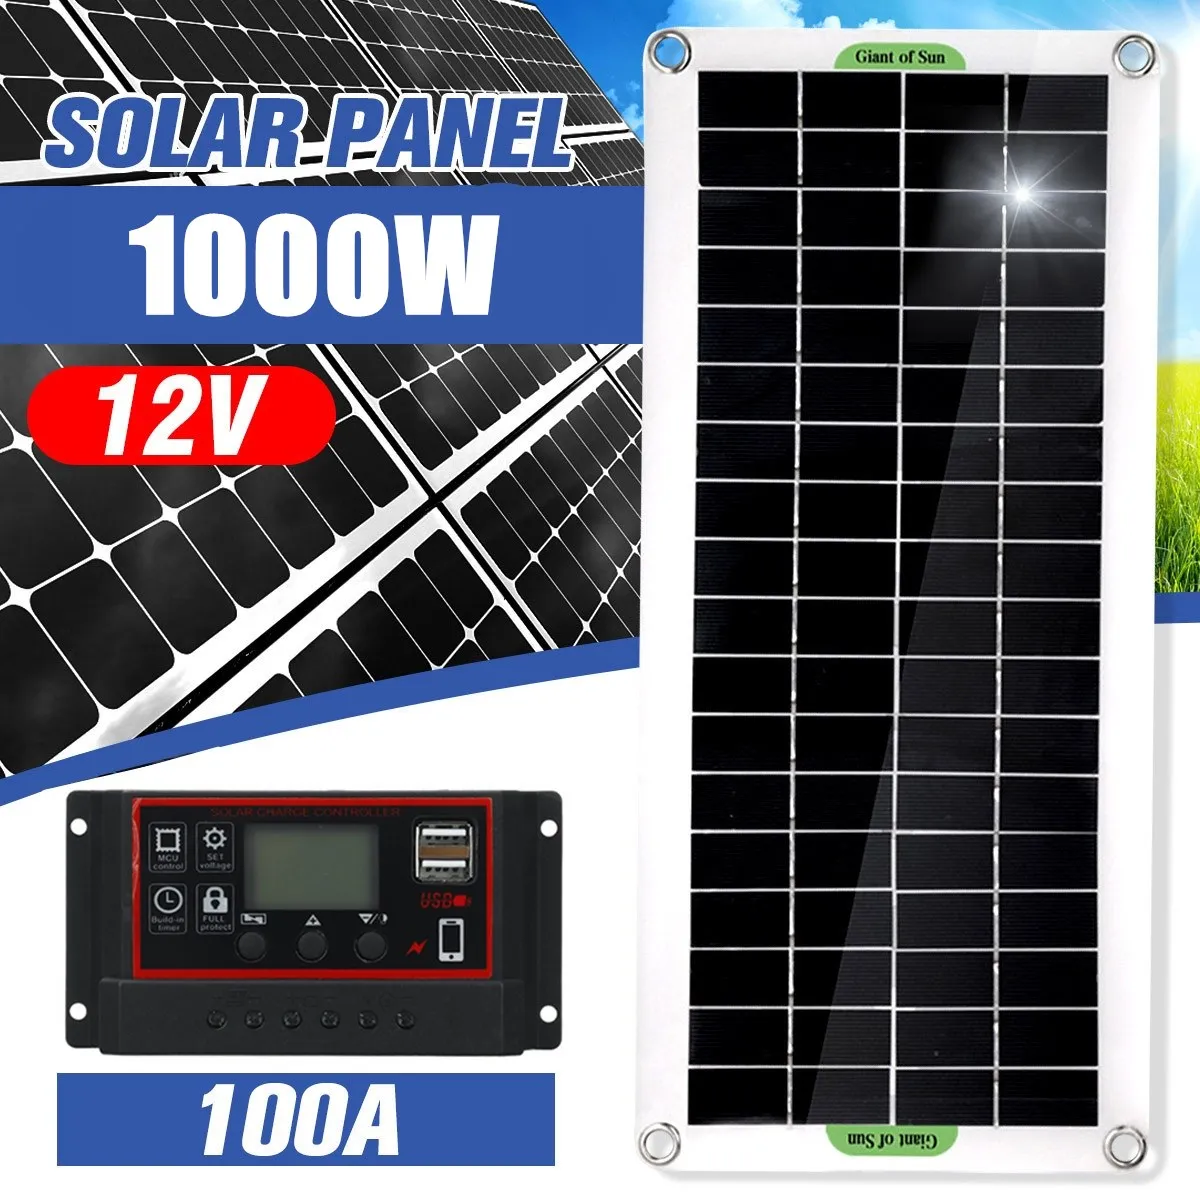 1000W Solar Panel 12V Cell 10A-100A Controller for Phone RV Car MP3 PAD Charger Outdoor Battery Supply | Электроника